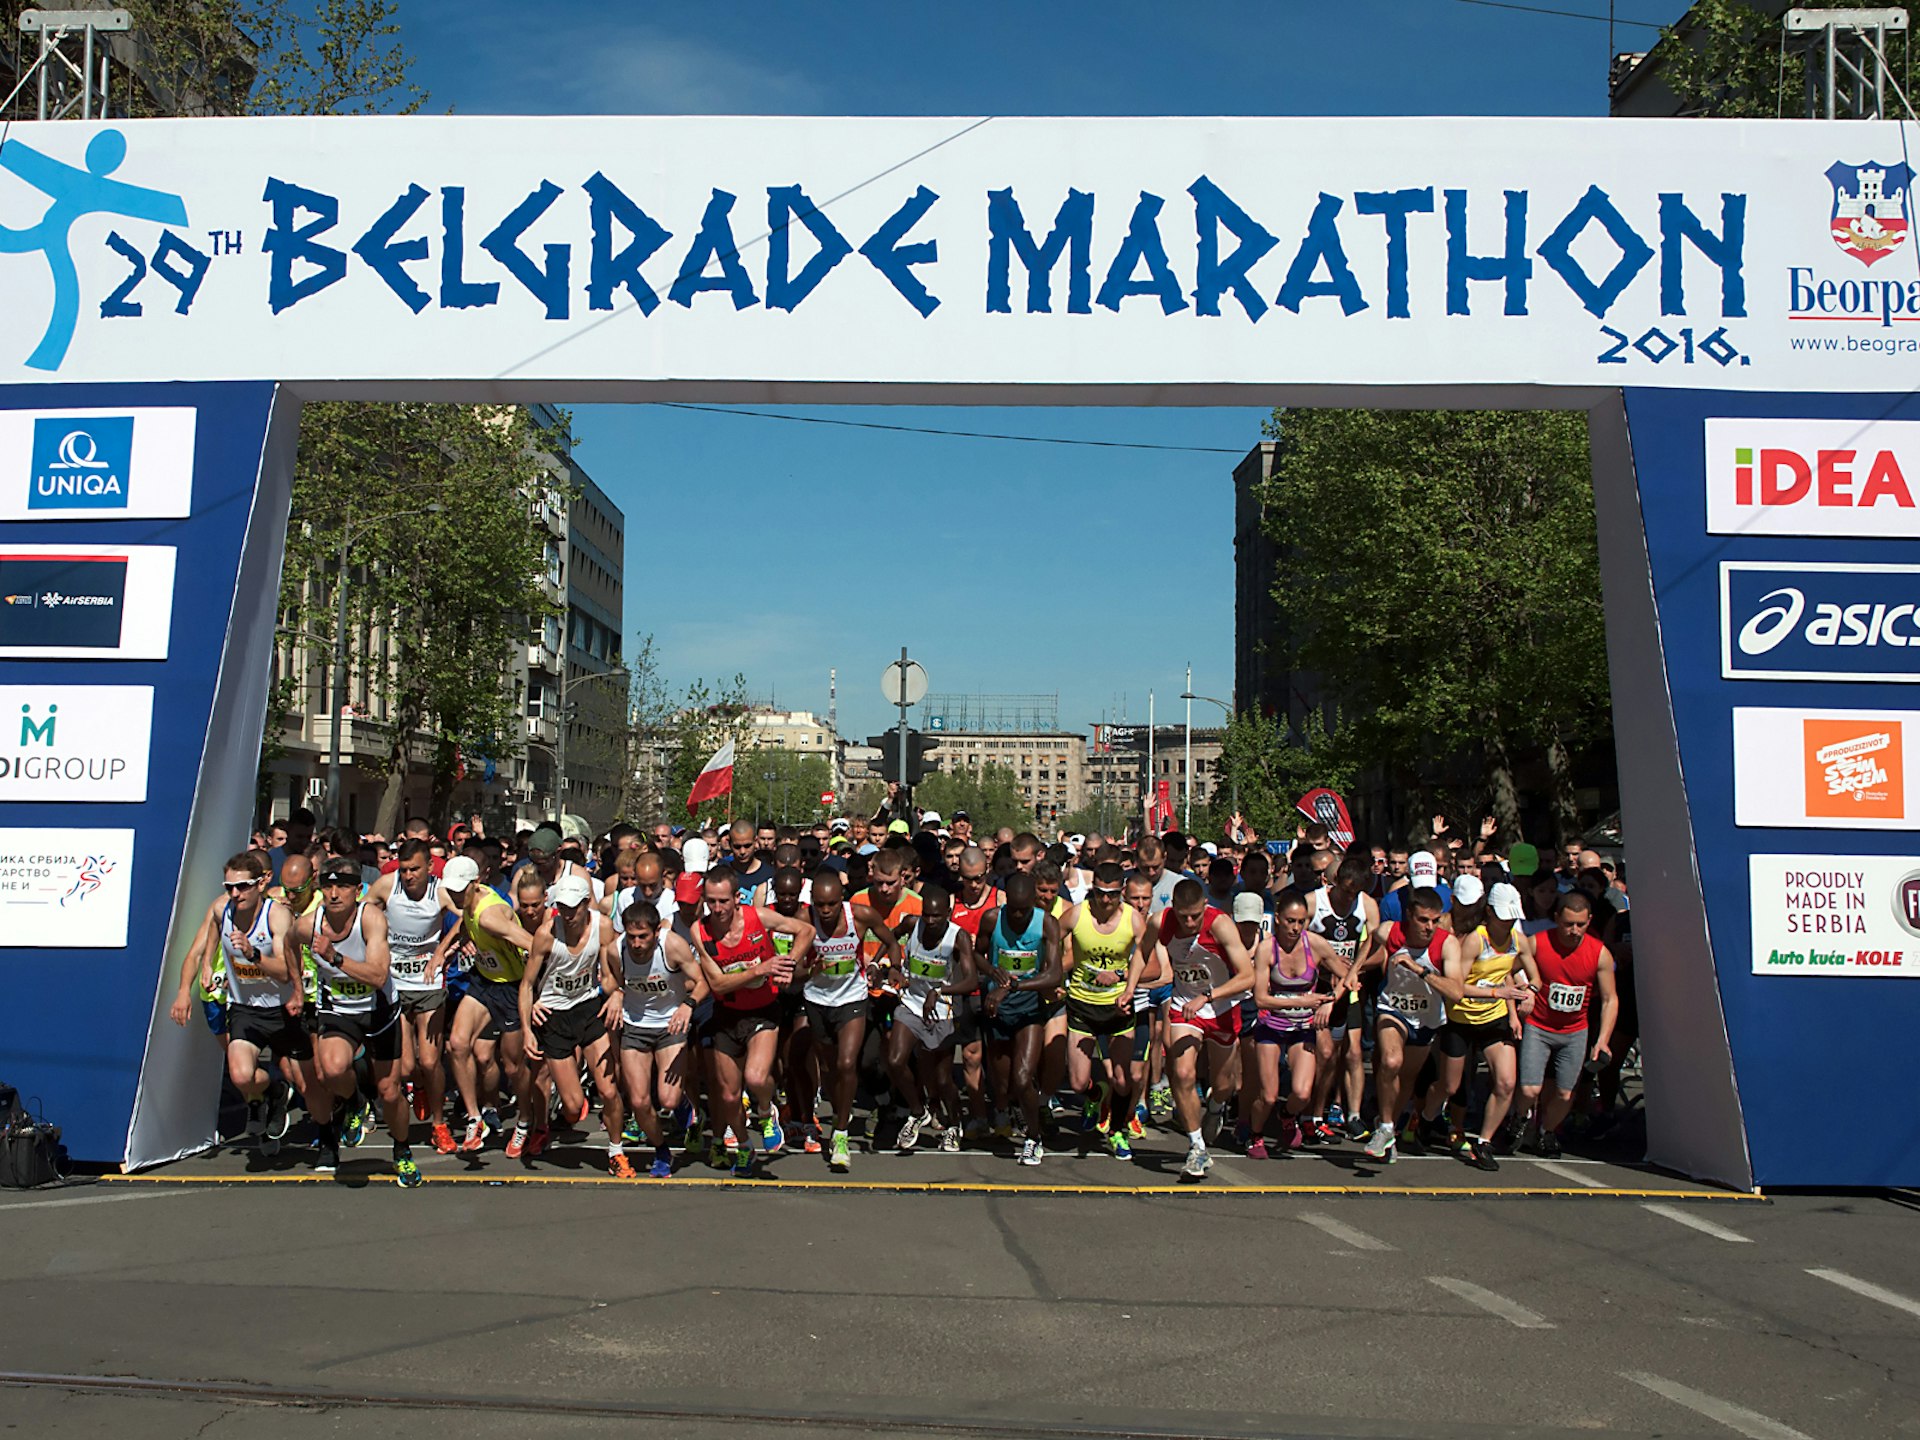 Runners at the starting line under the banner of the 29th Belgrade Marathon 